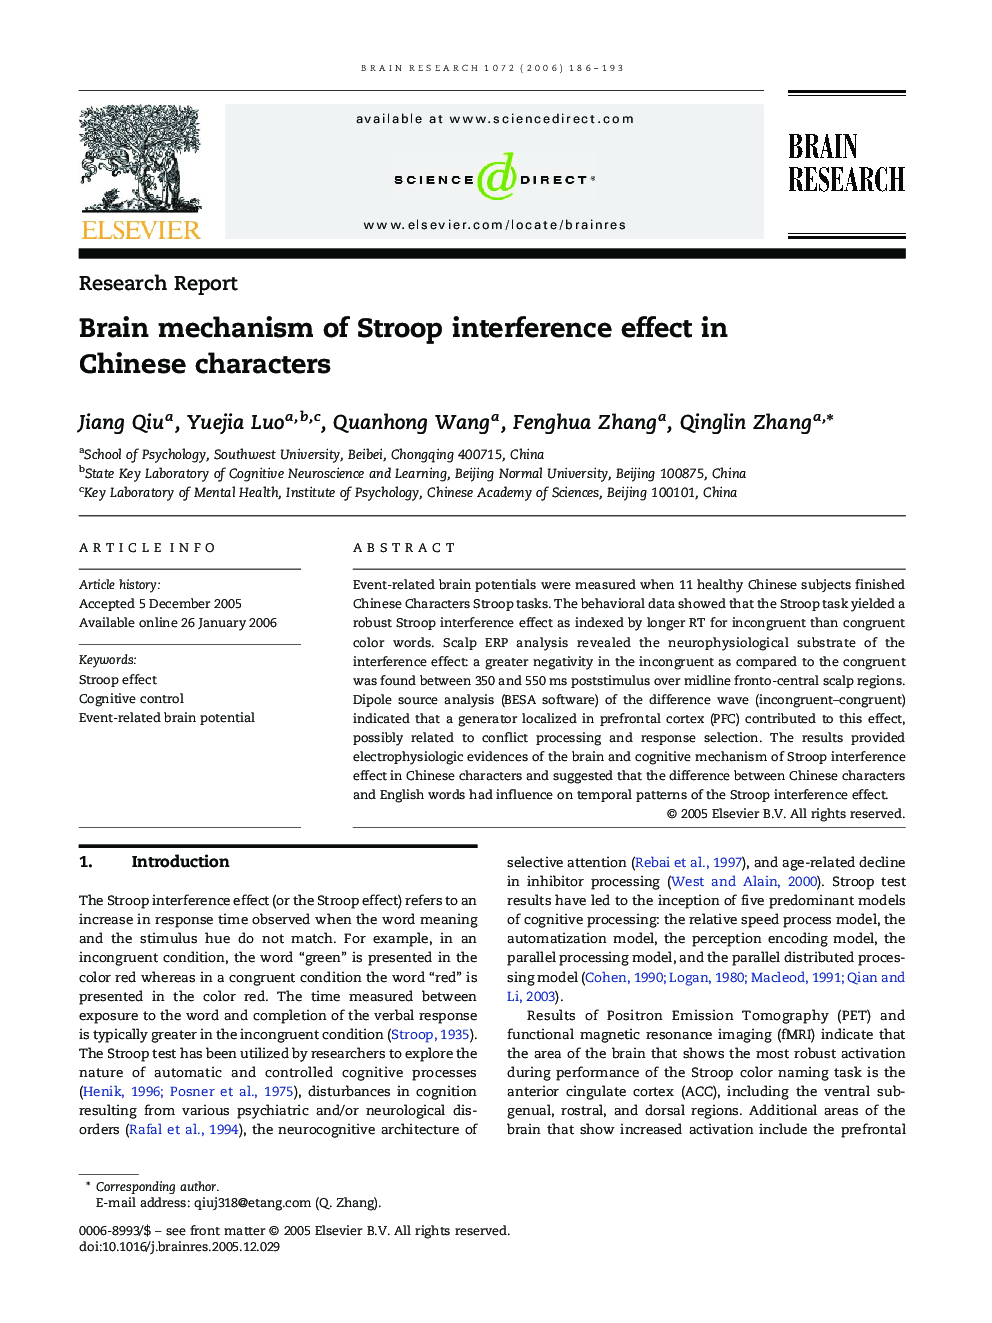 Brain mechanism of Stroop interference effect in Chinese characters